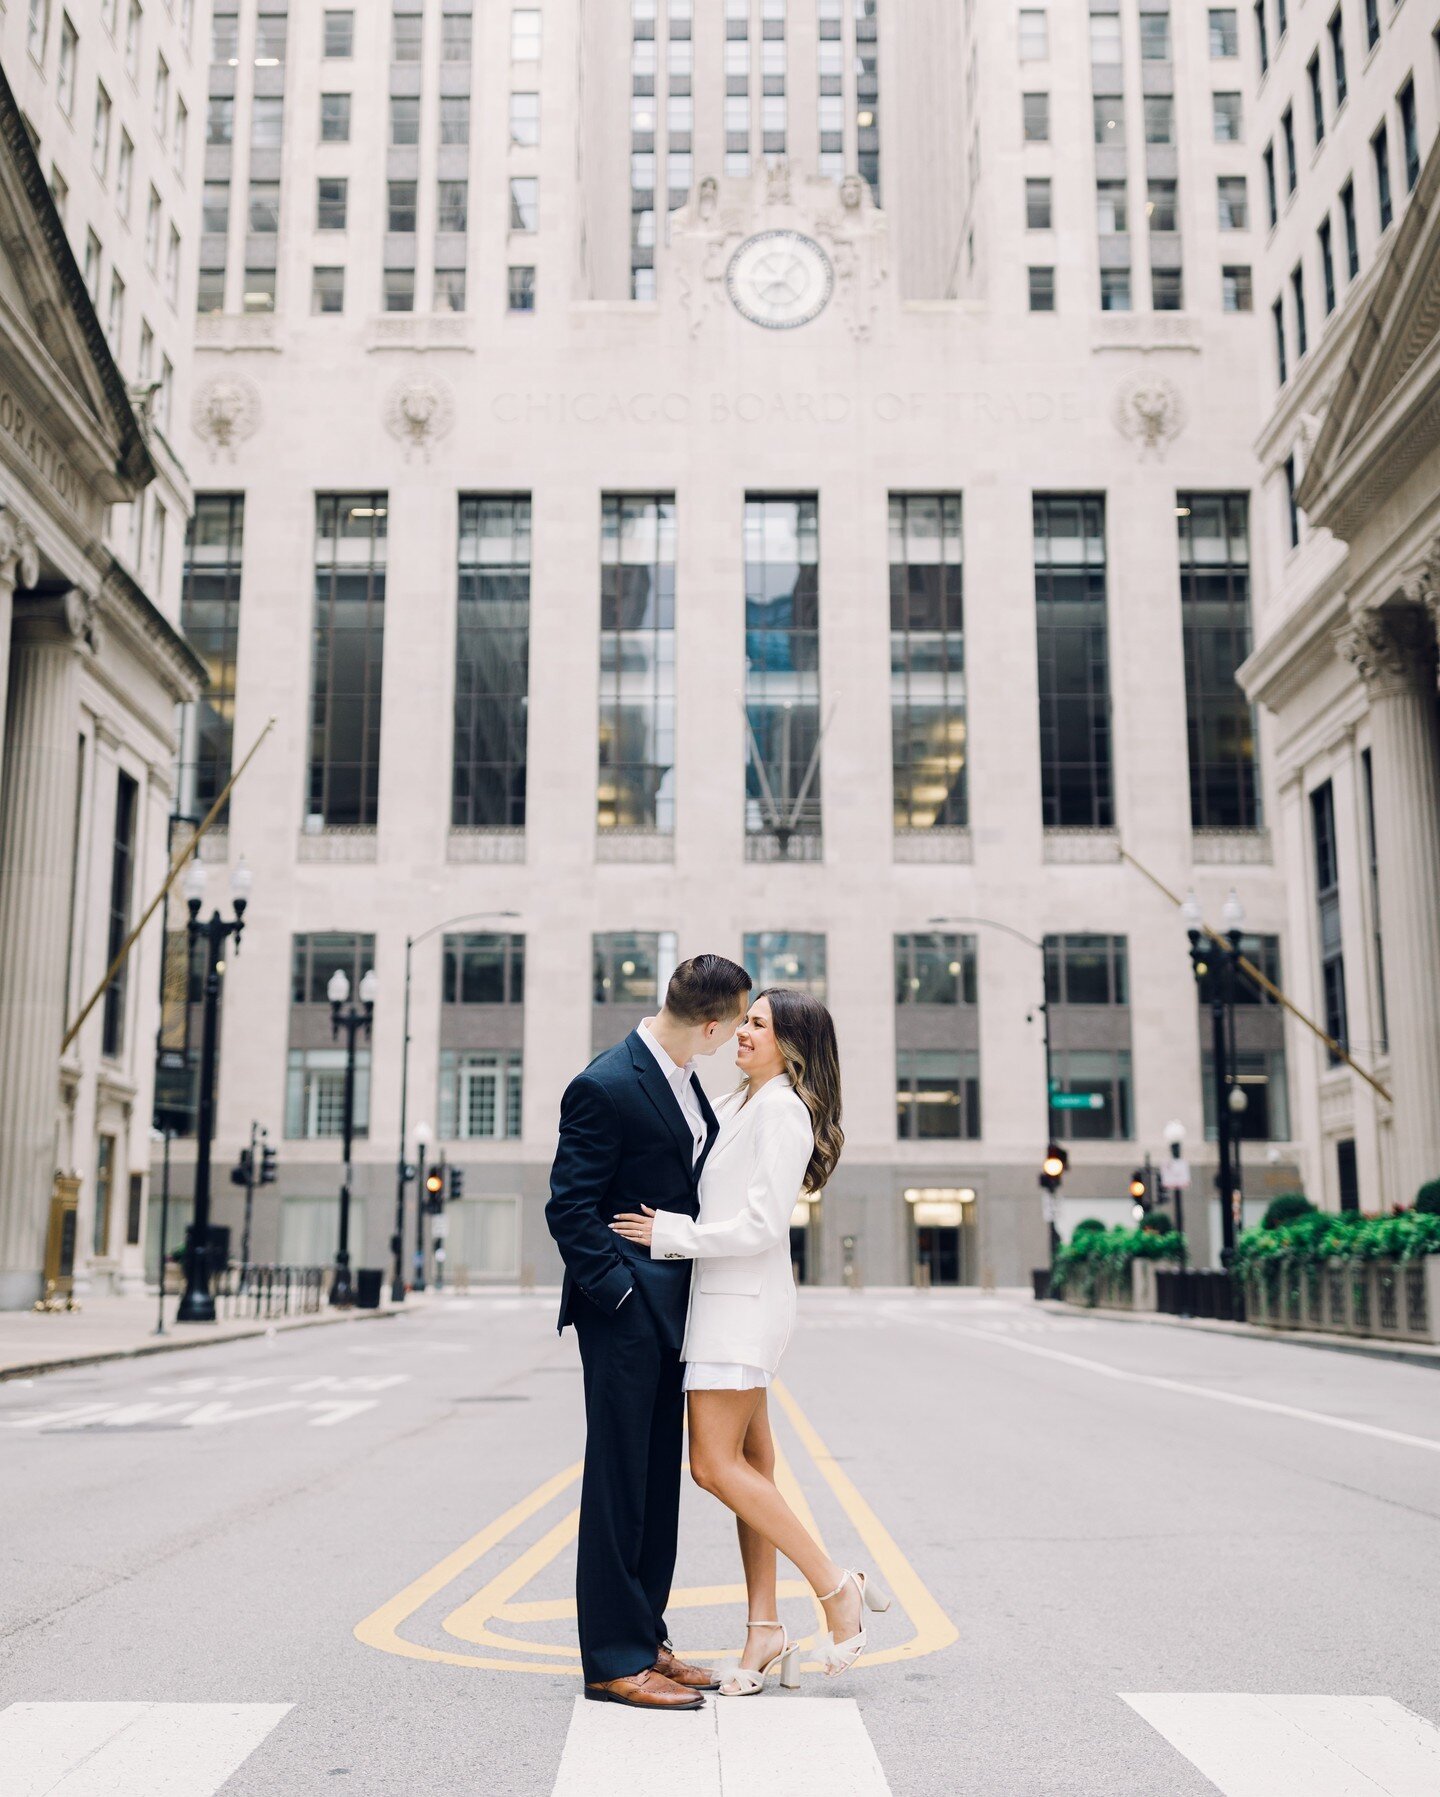 We are in love with these downtown Chicago Engagement pictures. Such romantic and chic vibes that provided the perfect atmosphere for John &amp; Dani's session.